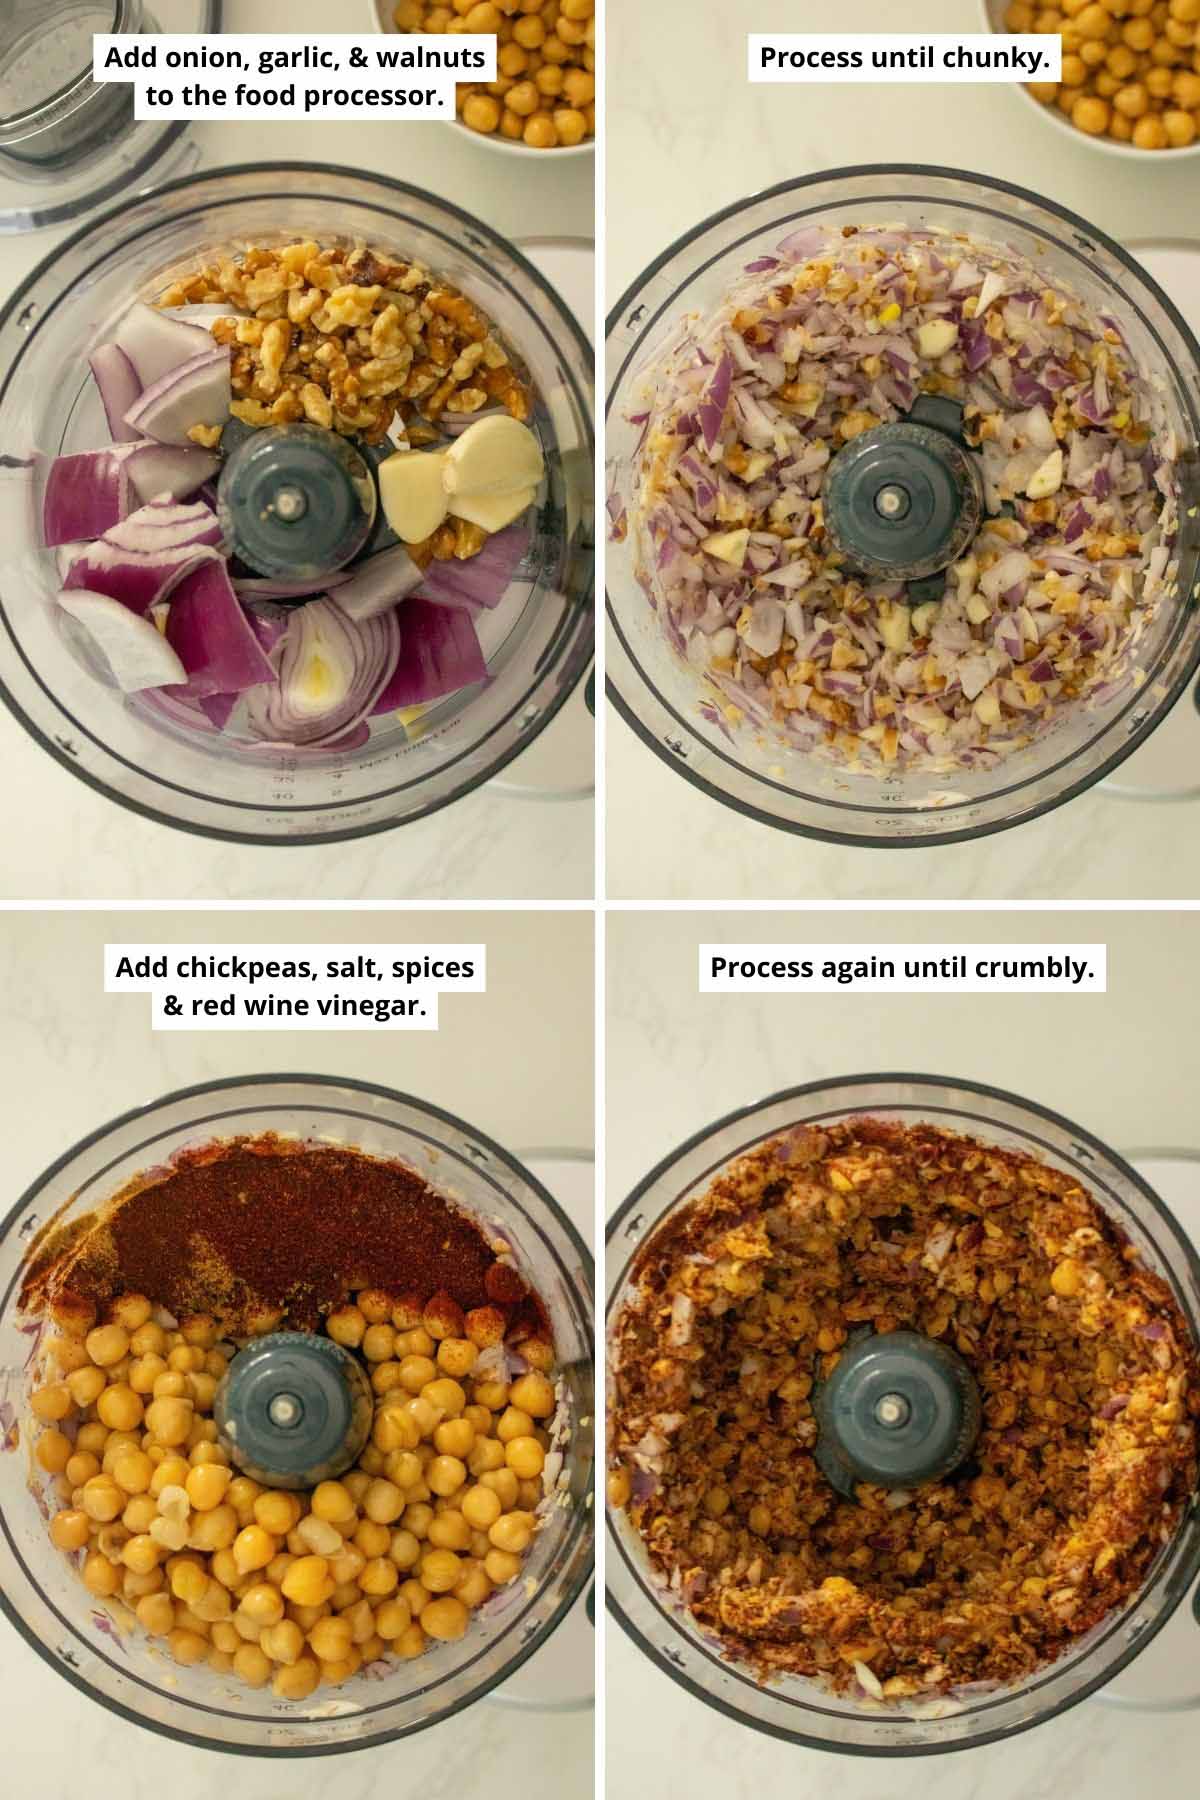 image collage showing processing the walnuts and aromatics and the chickpeas, vinegar, and spices